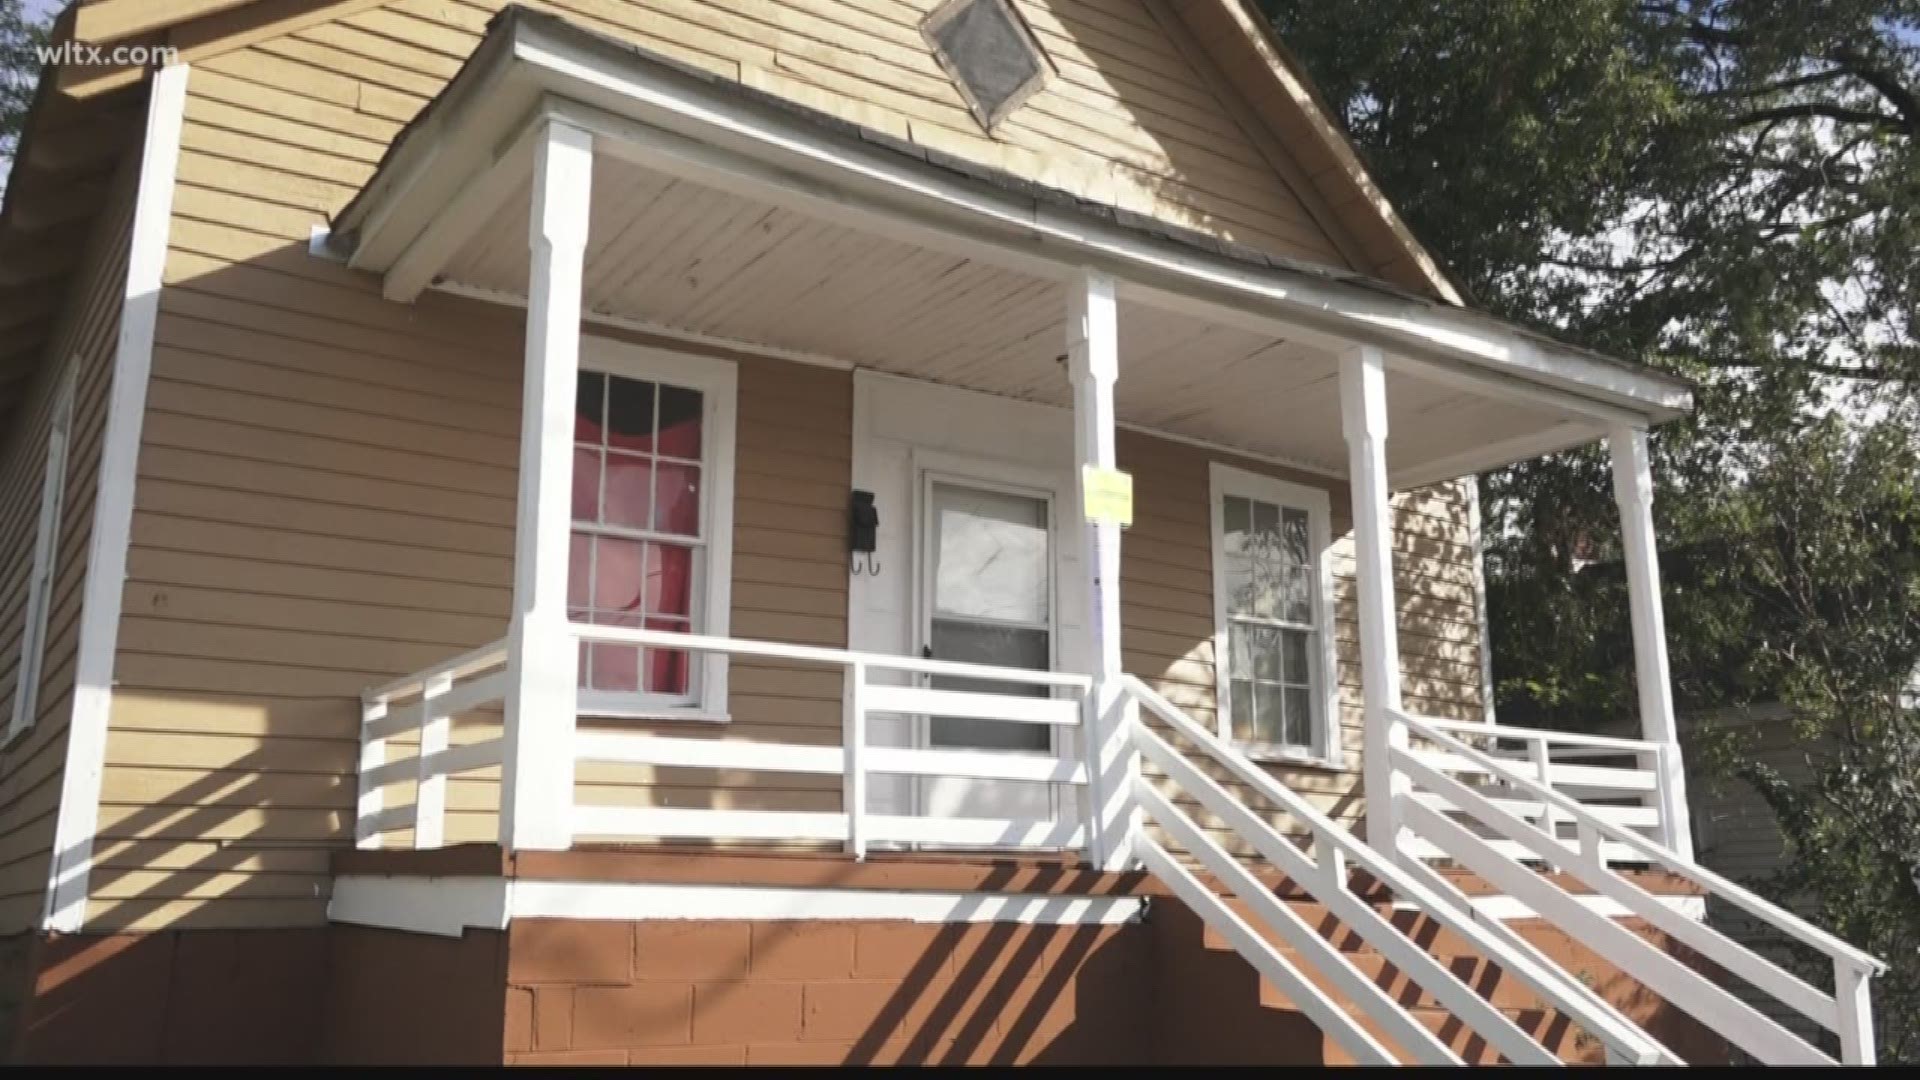 A Columbia woman and her family have to find somewhere else to live after learning the home they recently moved into has been condemned by the City of Columbia.